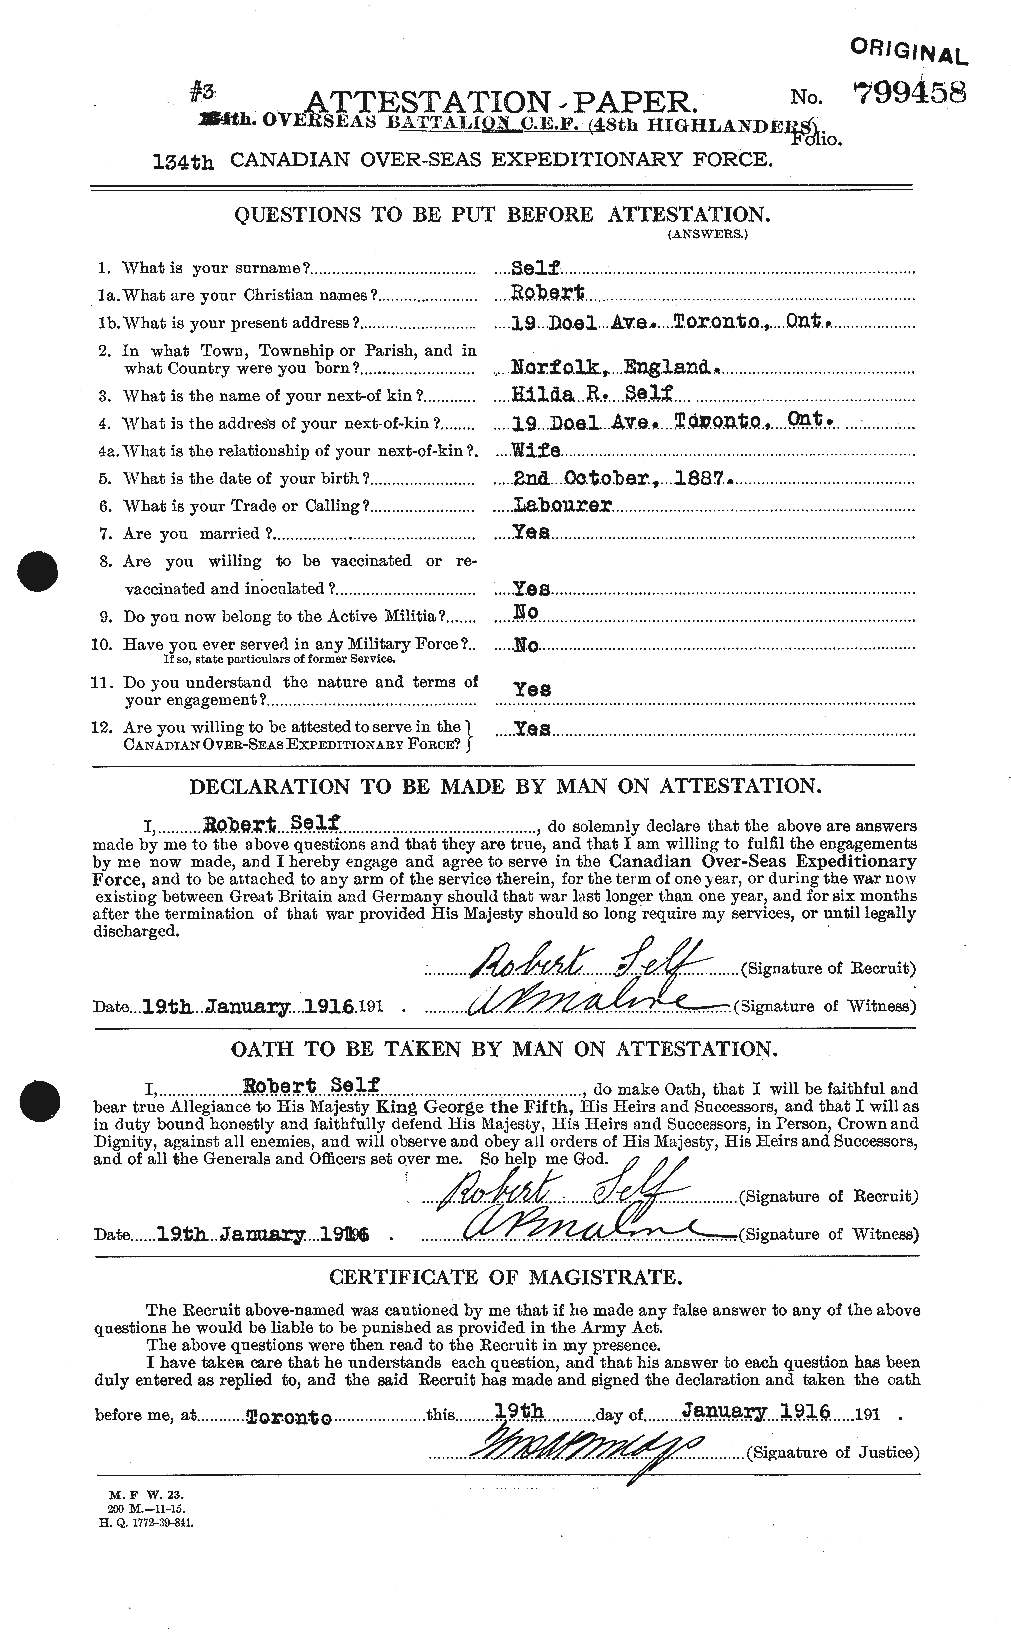 Personnel Records of the First World War - CEF 088376a